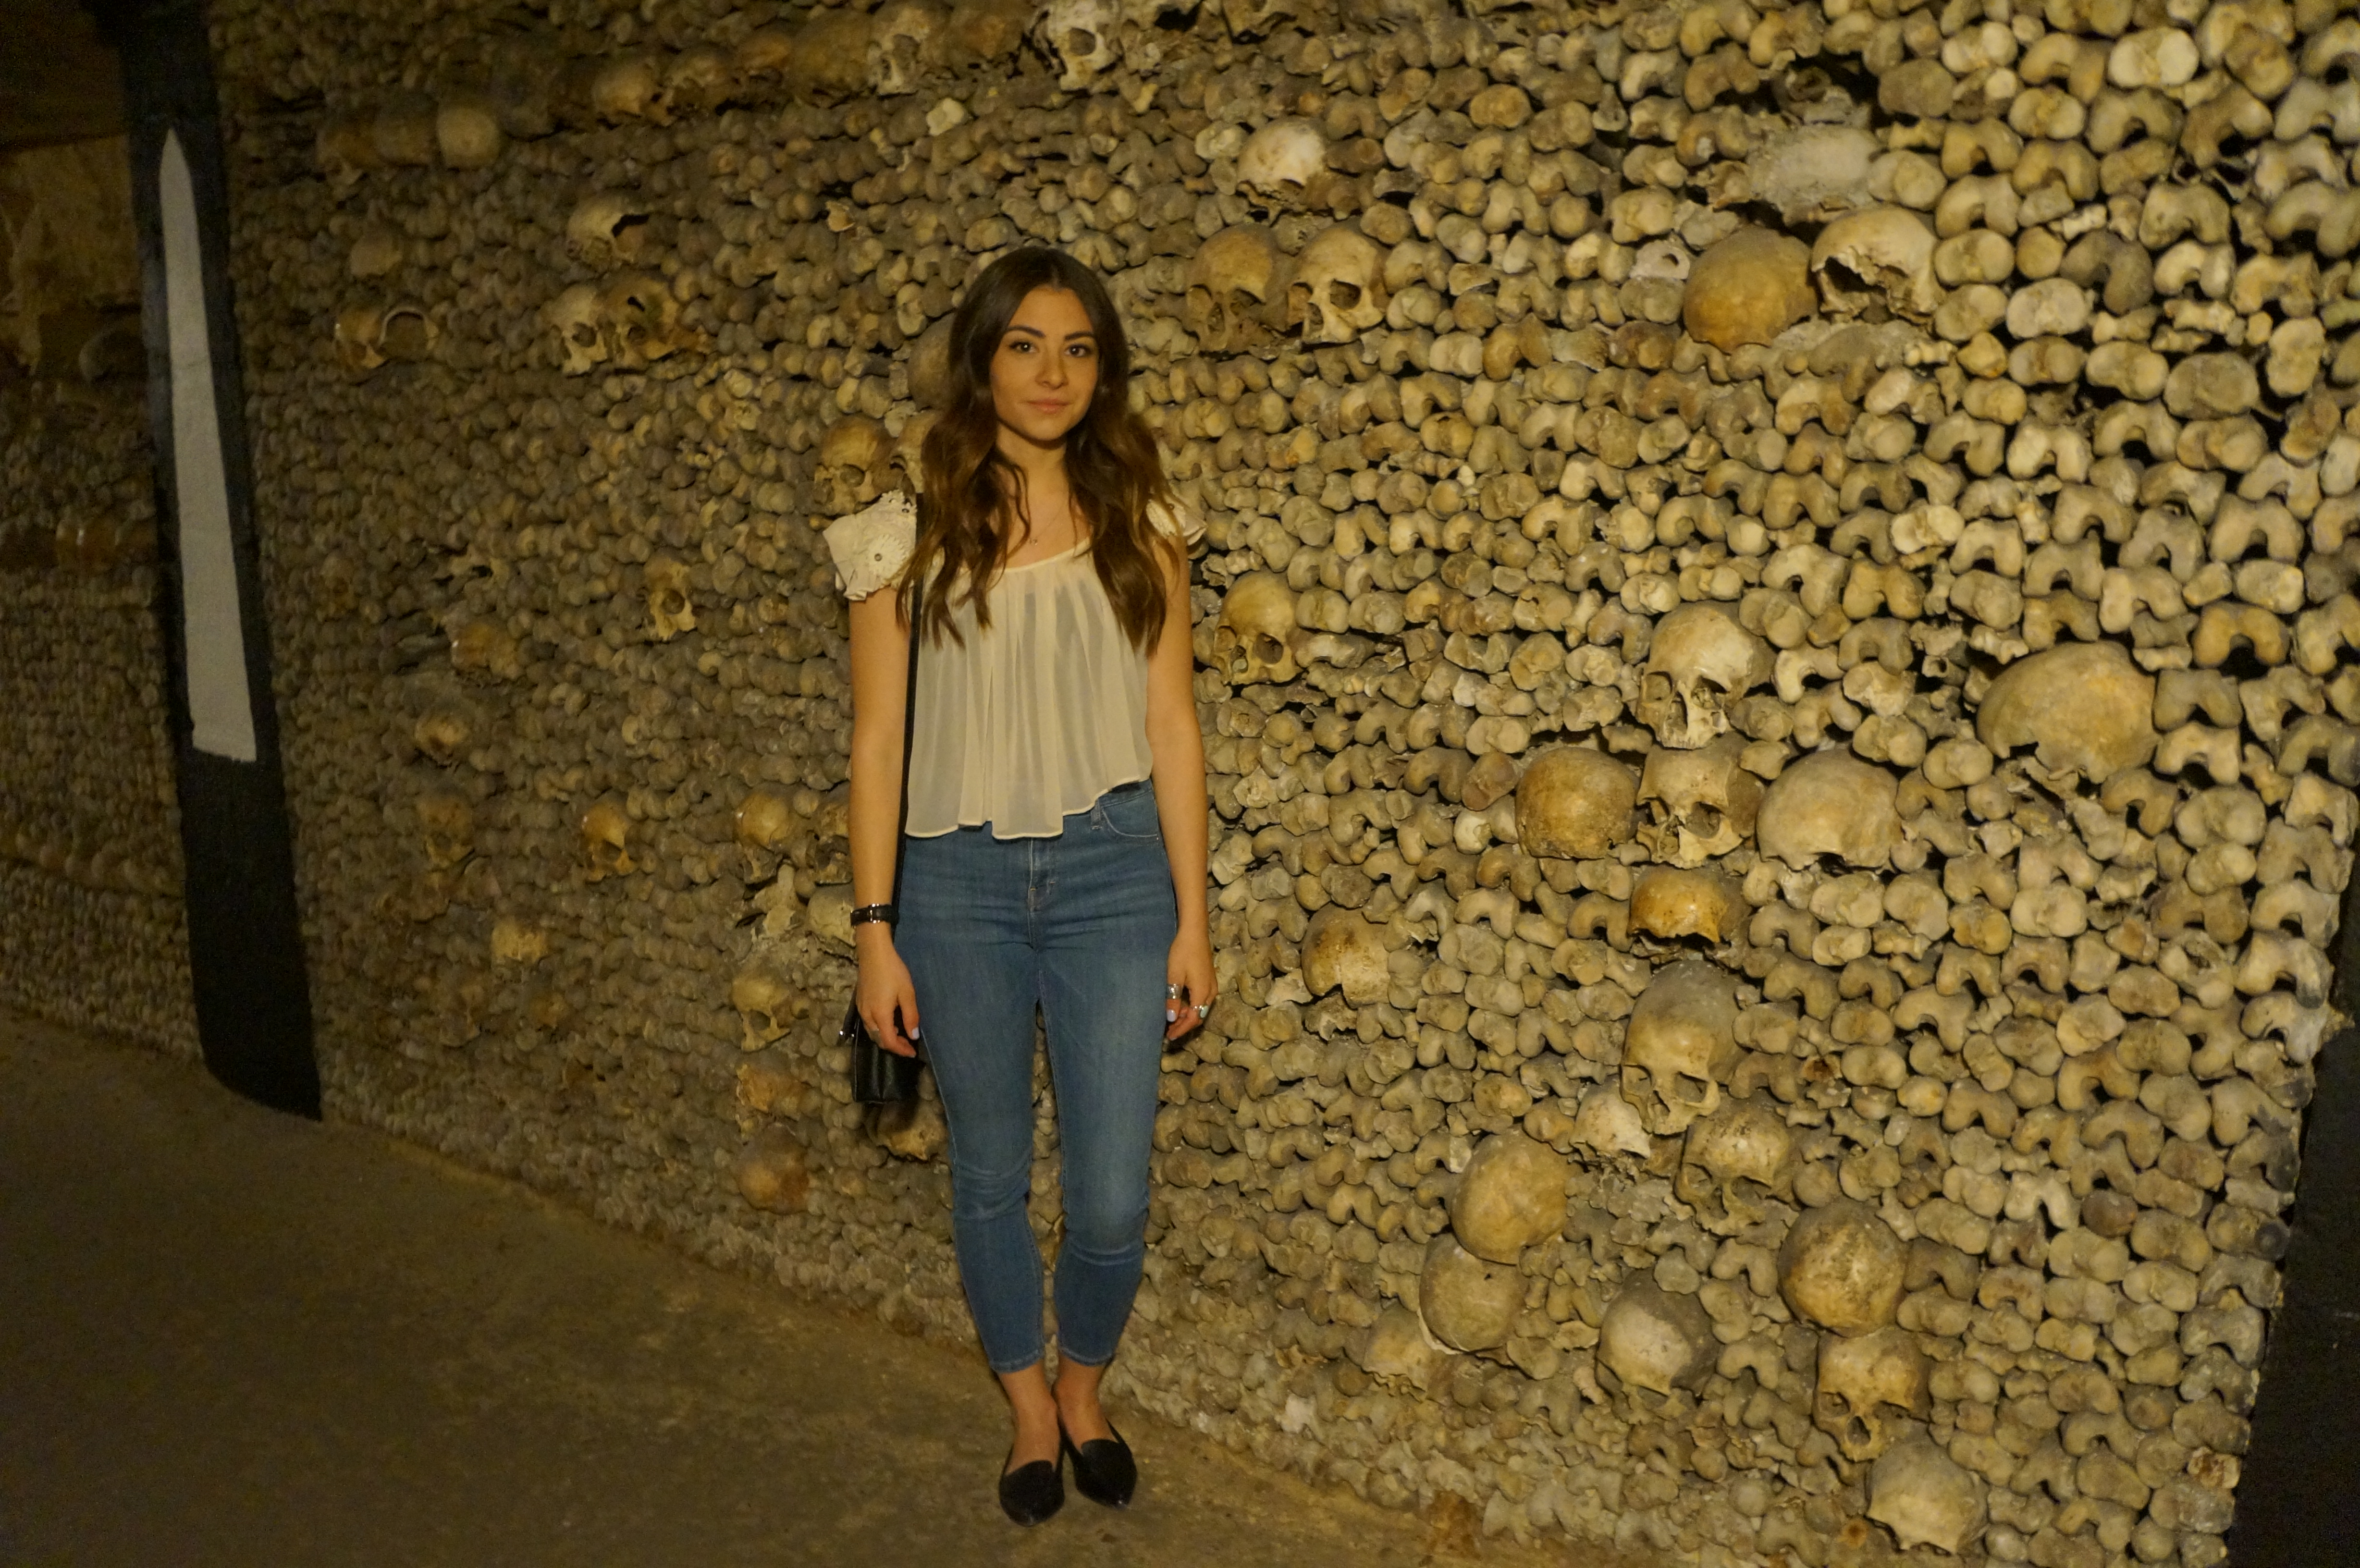 How to do Paris in 3 days The Catacombs